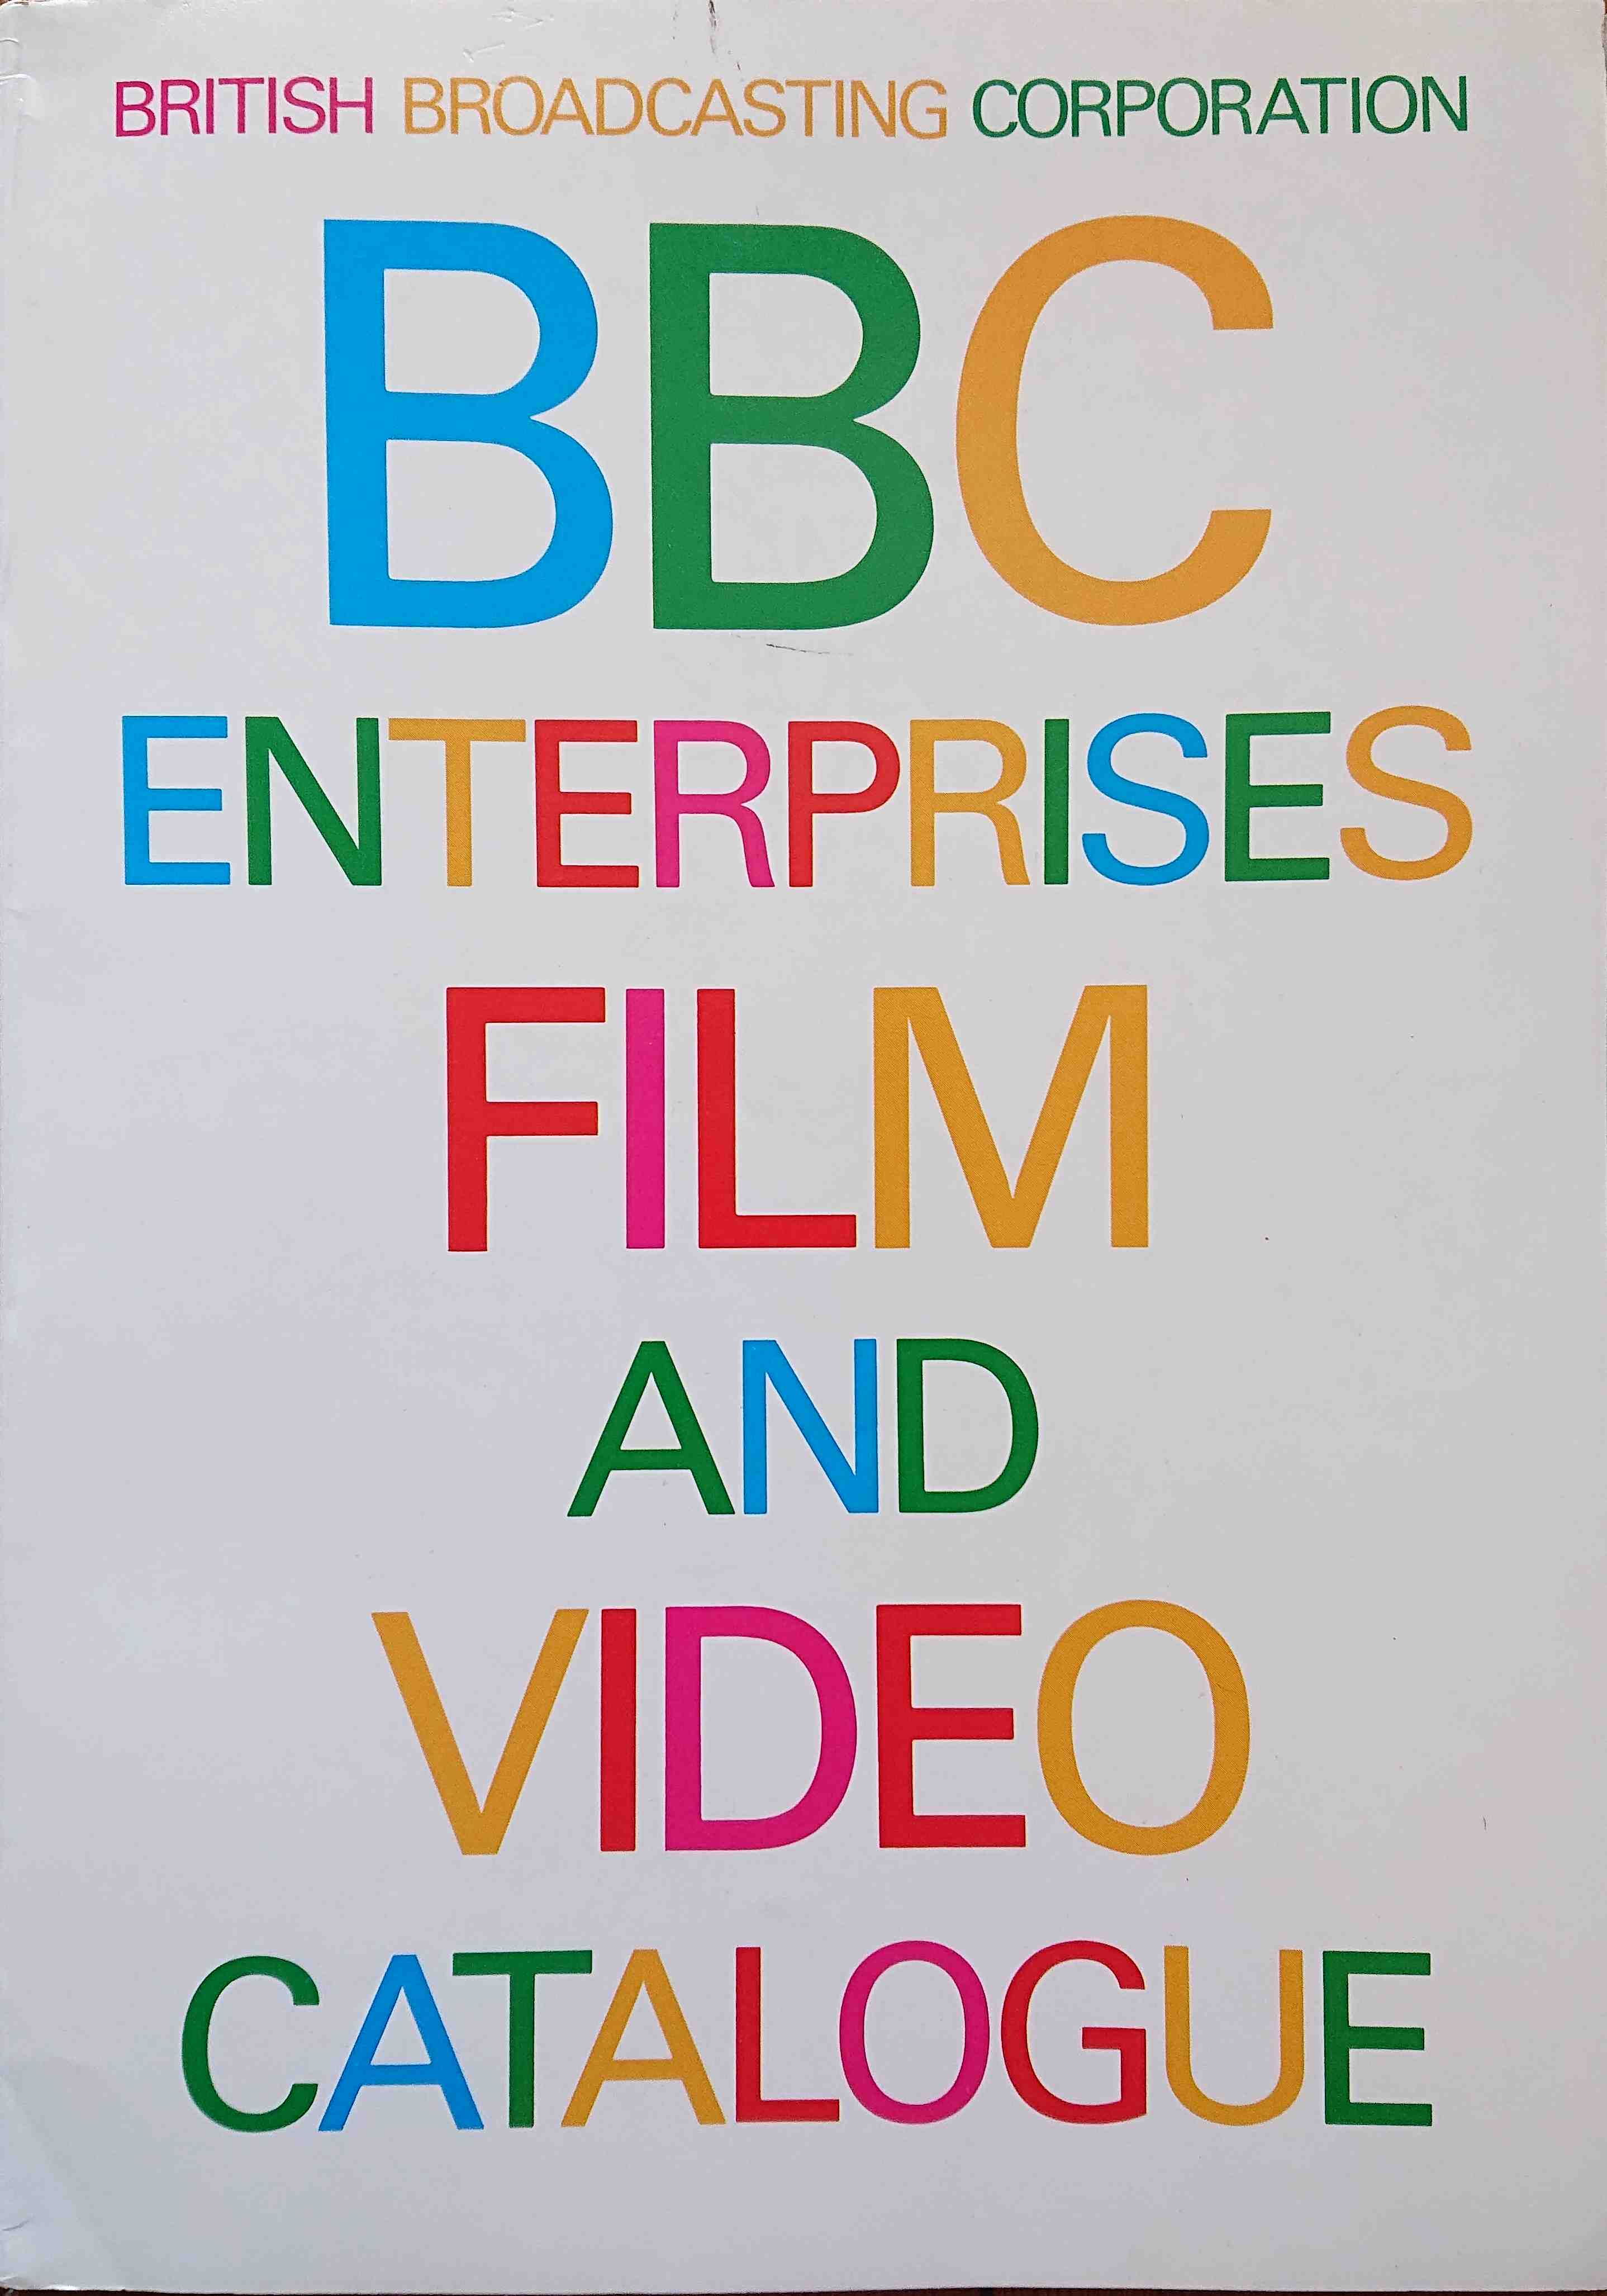 BBC film and video catalogue 1981.